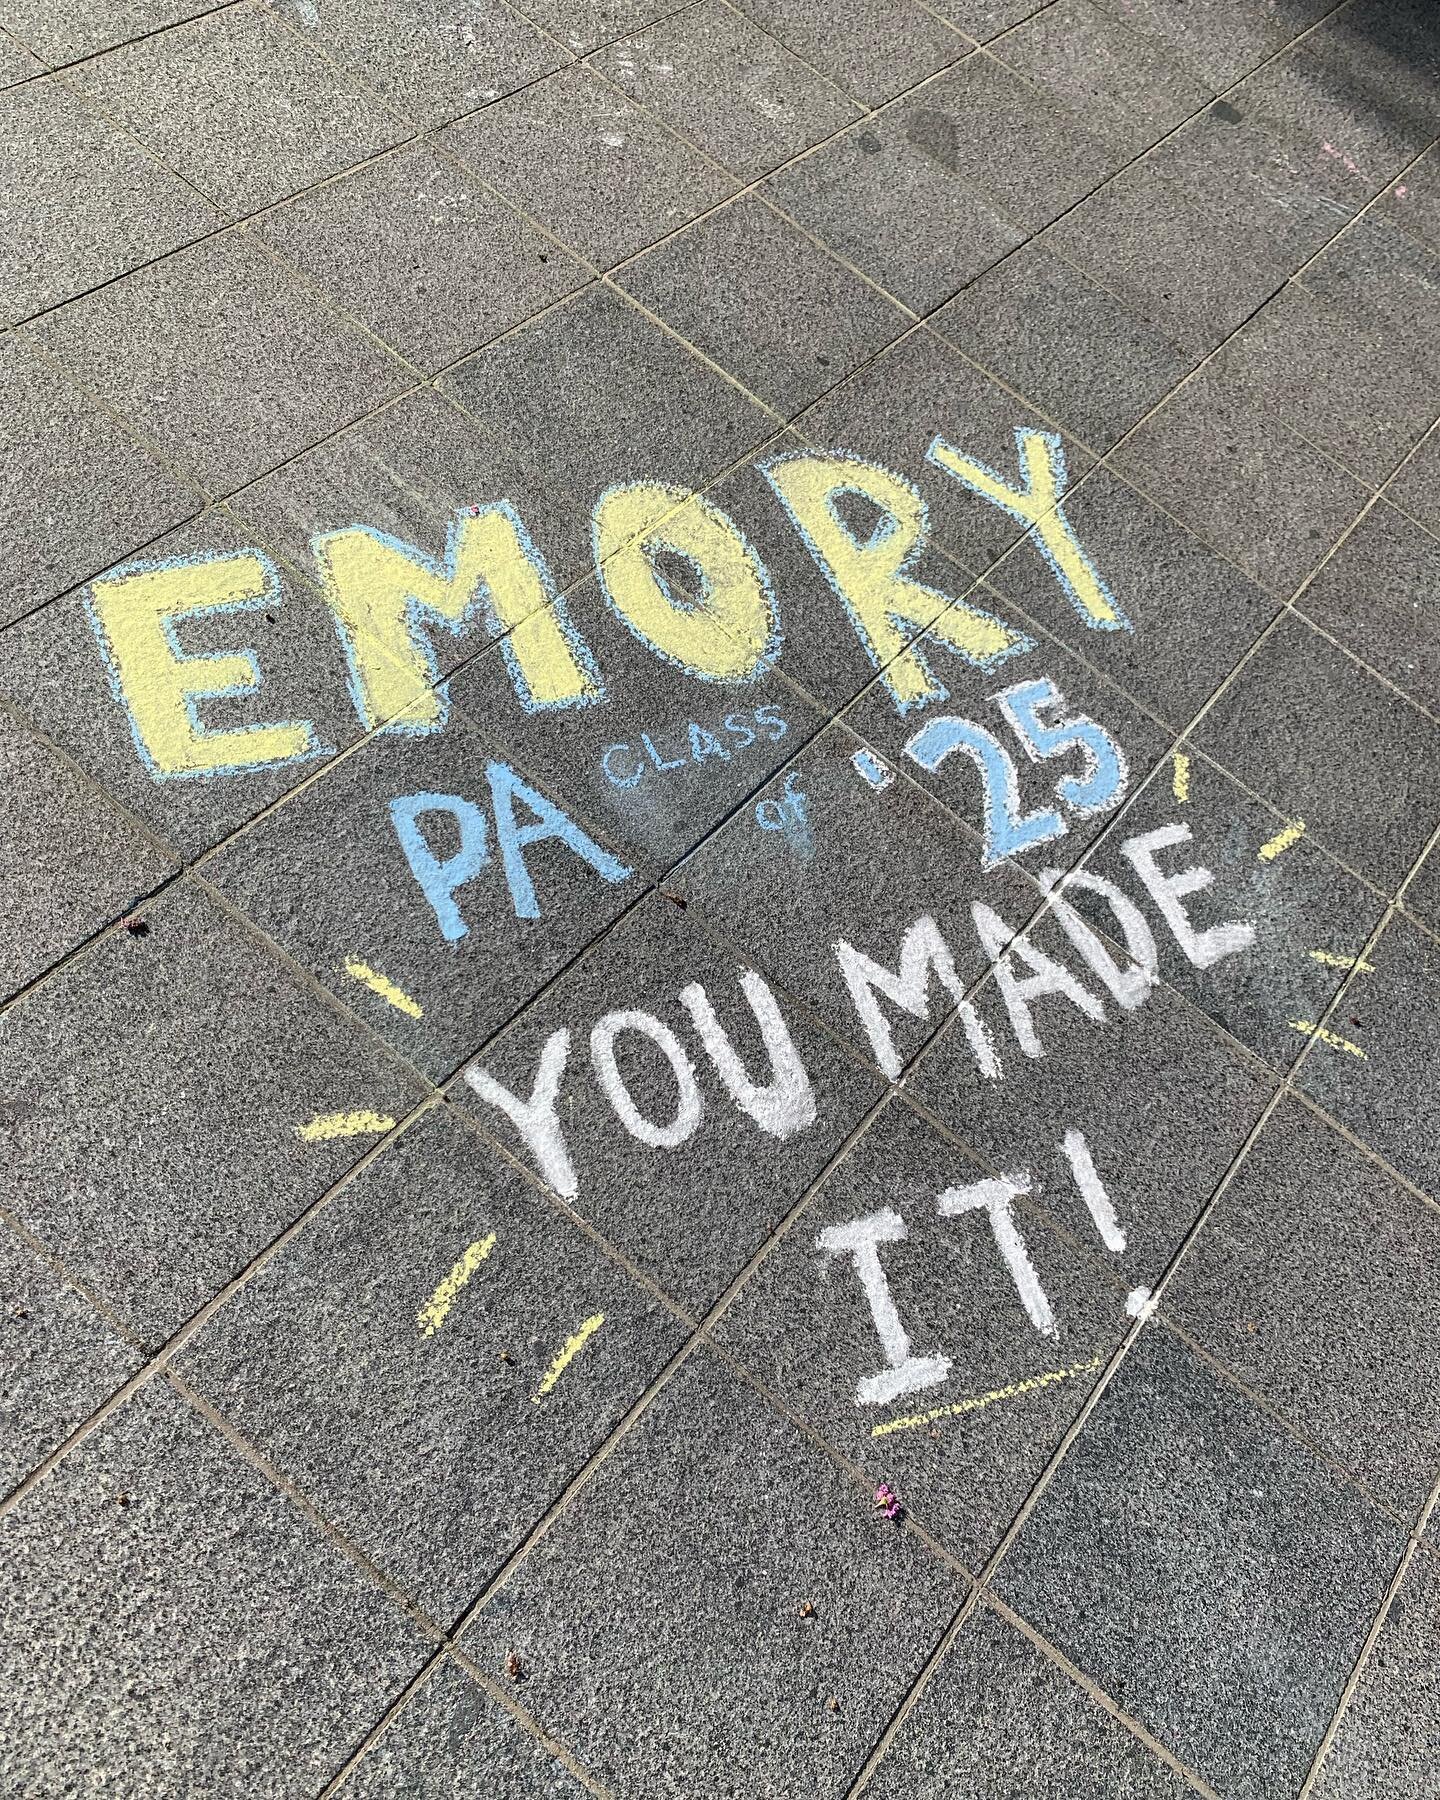 This time last year I was watching @emory_pas post pictures and videos of the class of &lsquo;24 on their first day and wondering if it might be my turn next year. If that&rsquo;s you this year (or a future year), please don&rsquo;t be a stranger! Th